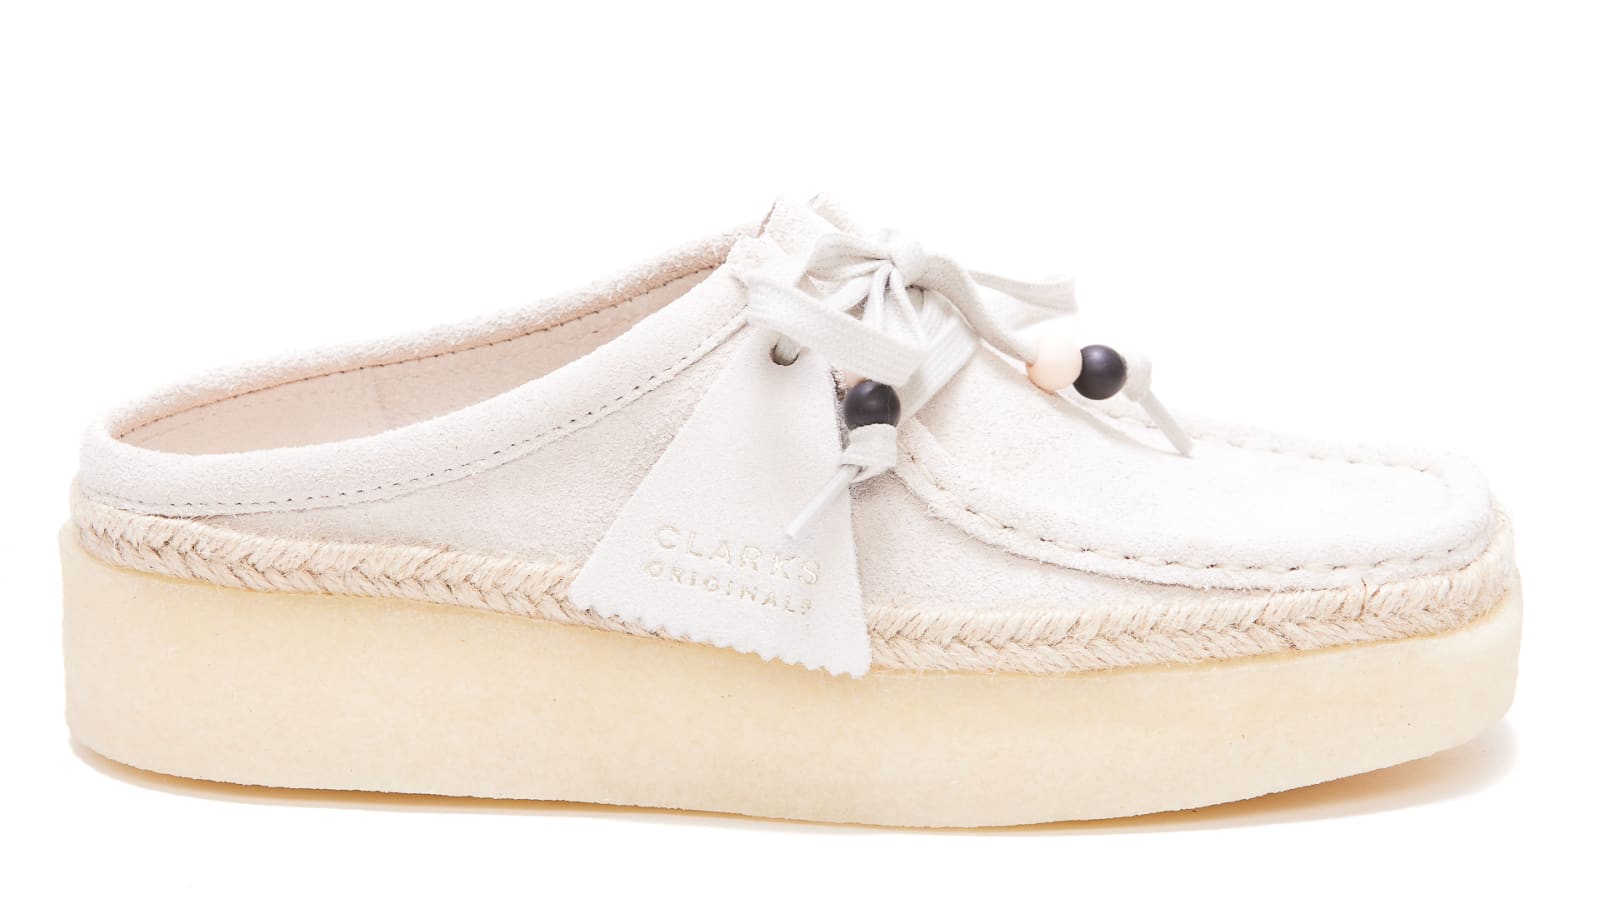 Clarks Wallabee Cup Low Slip On